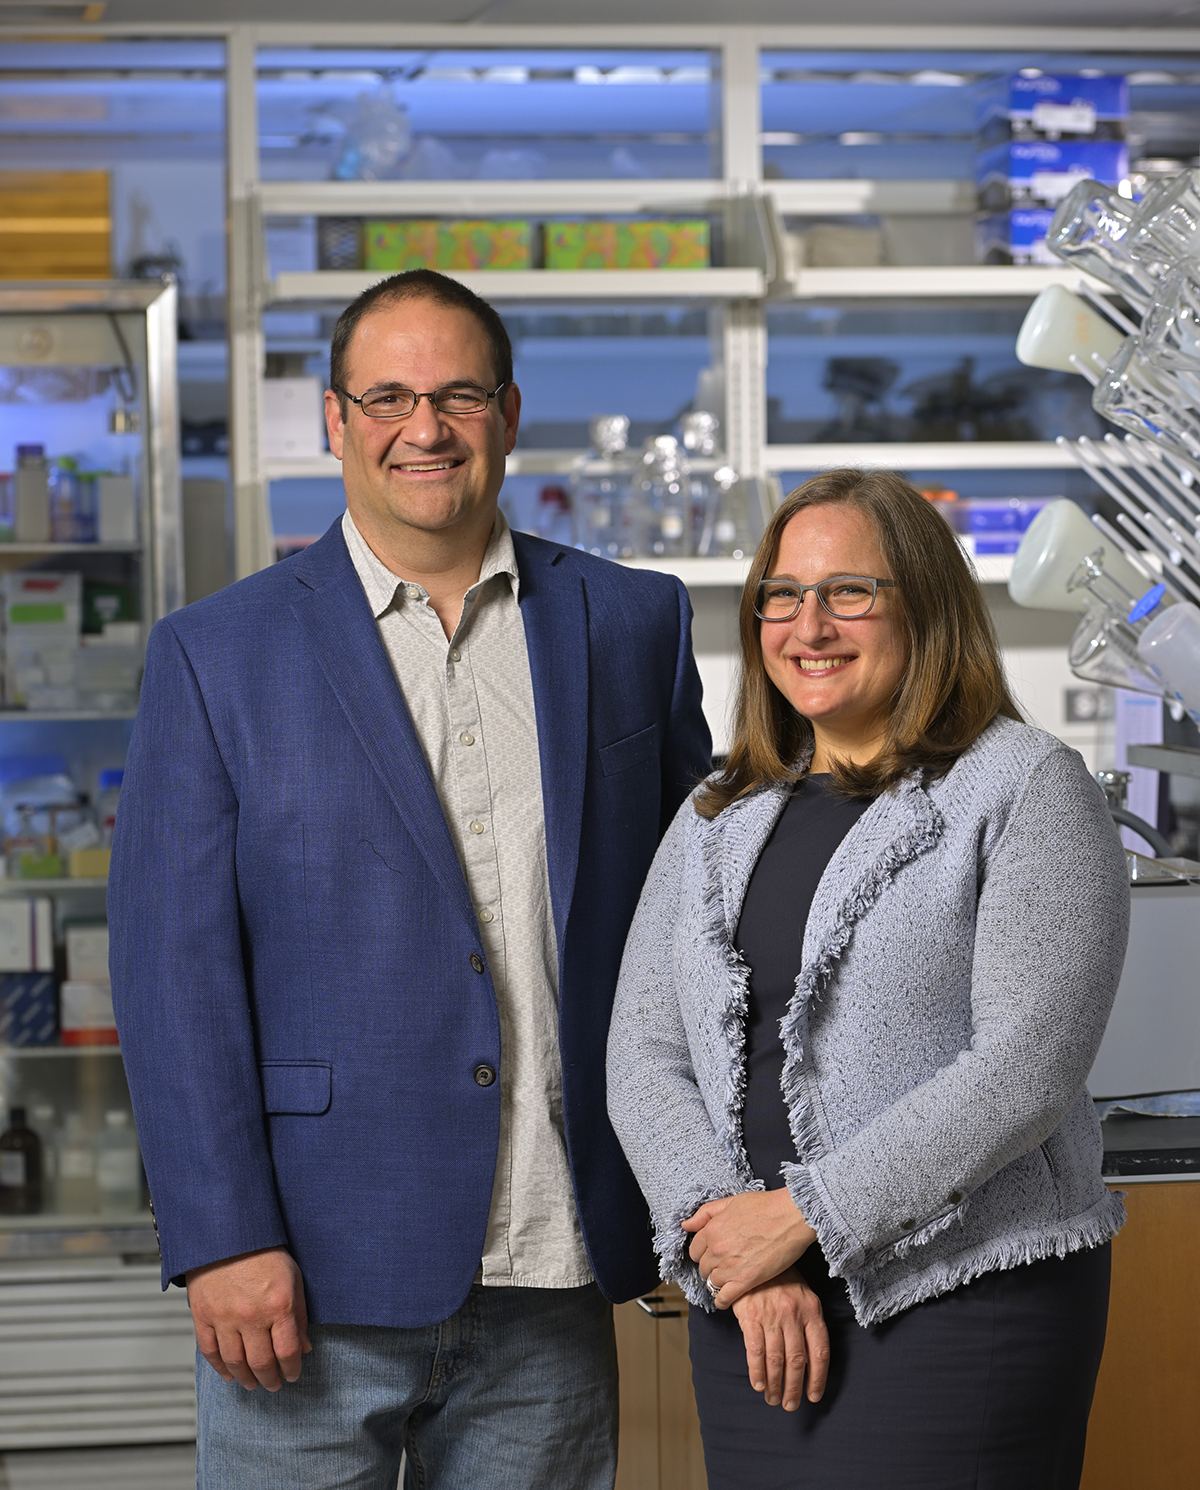 Dr. Philip Abbosh and Dr. Elizabeth Plimack standing in the laboratory.